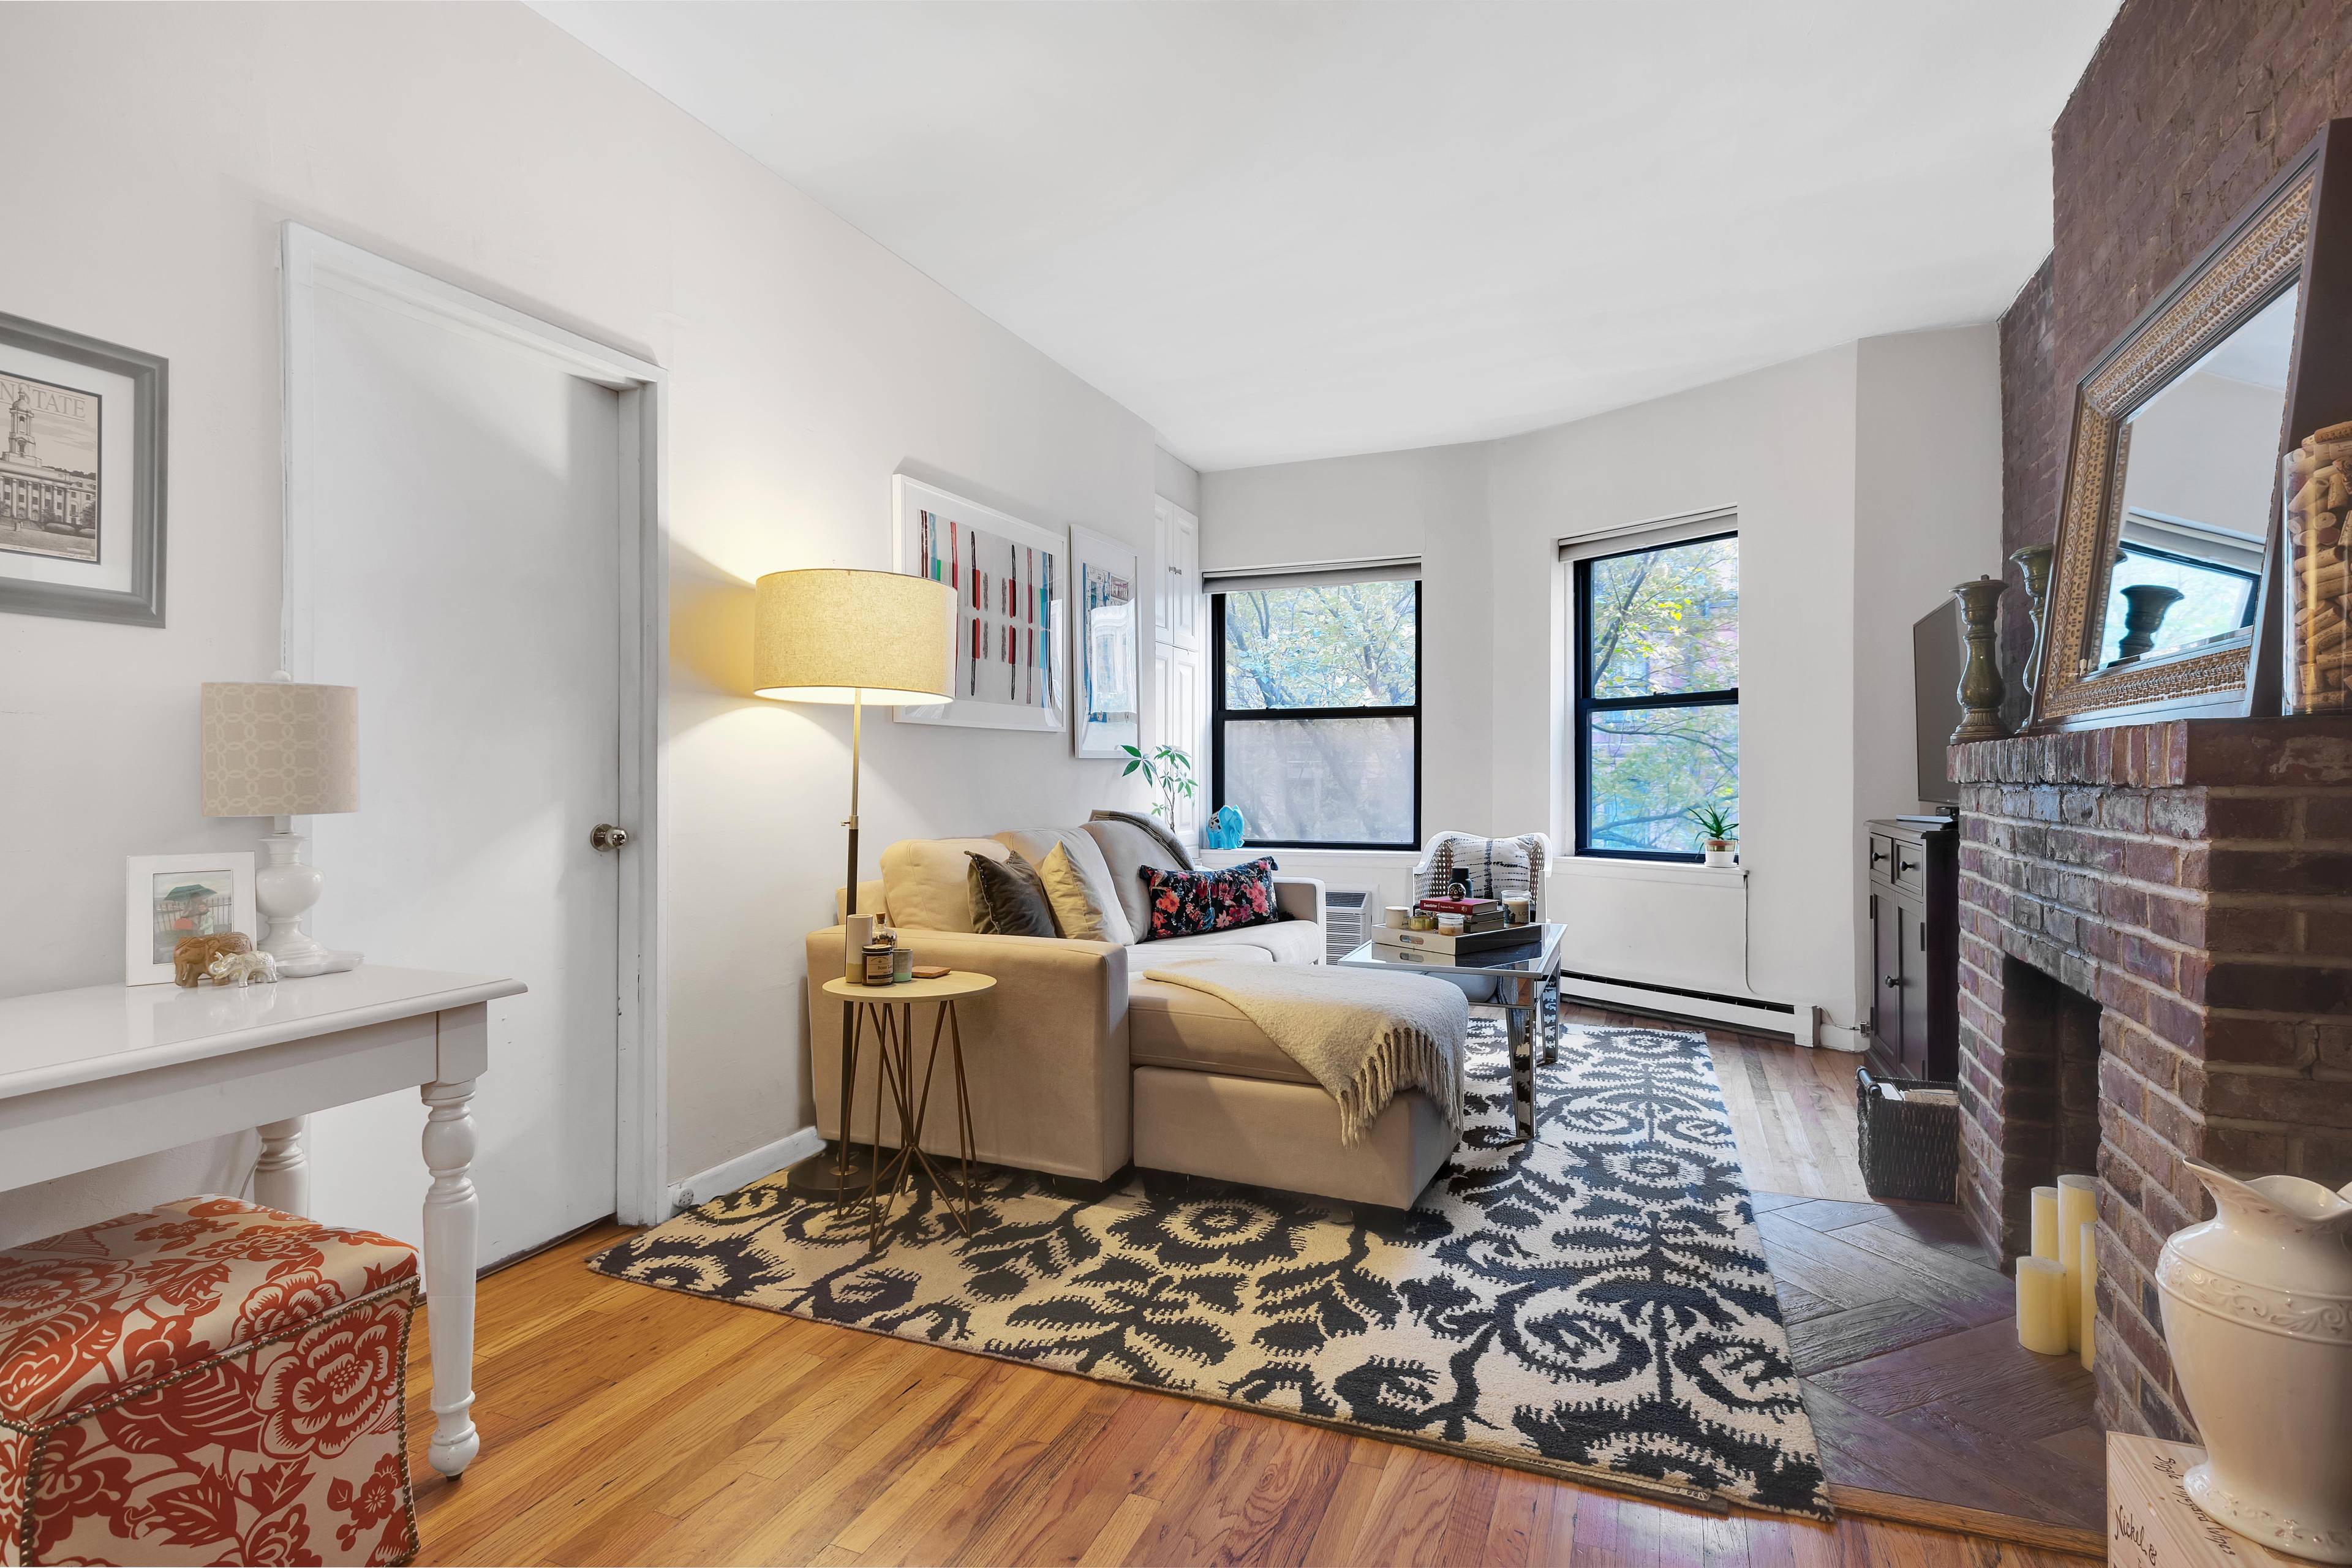 Charming one bedroom in an elegant pre war brownstone, located on one of the most breathtaking tree lined blocks off Riverside Drive.